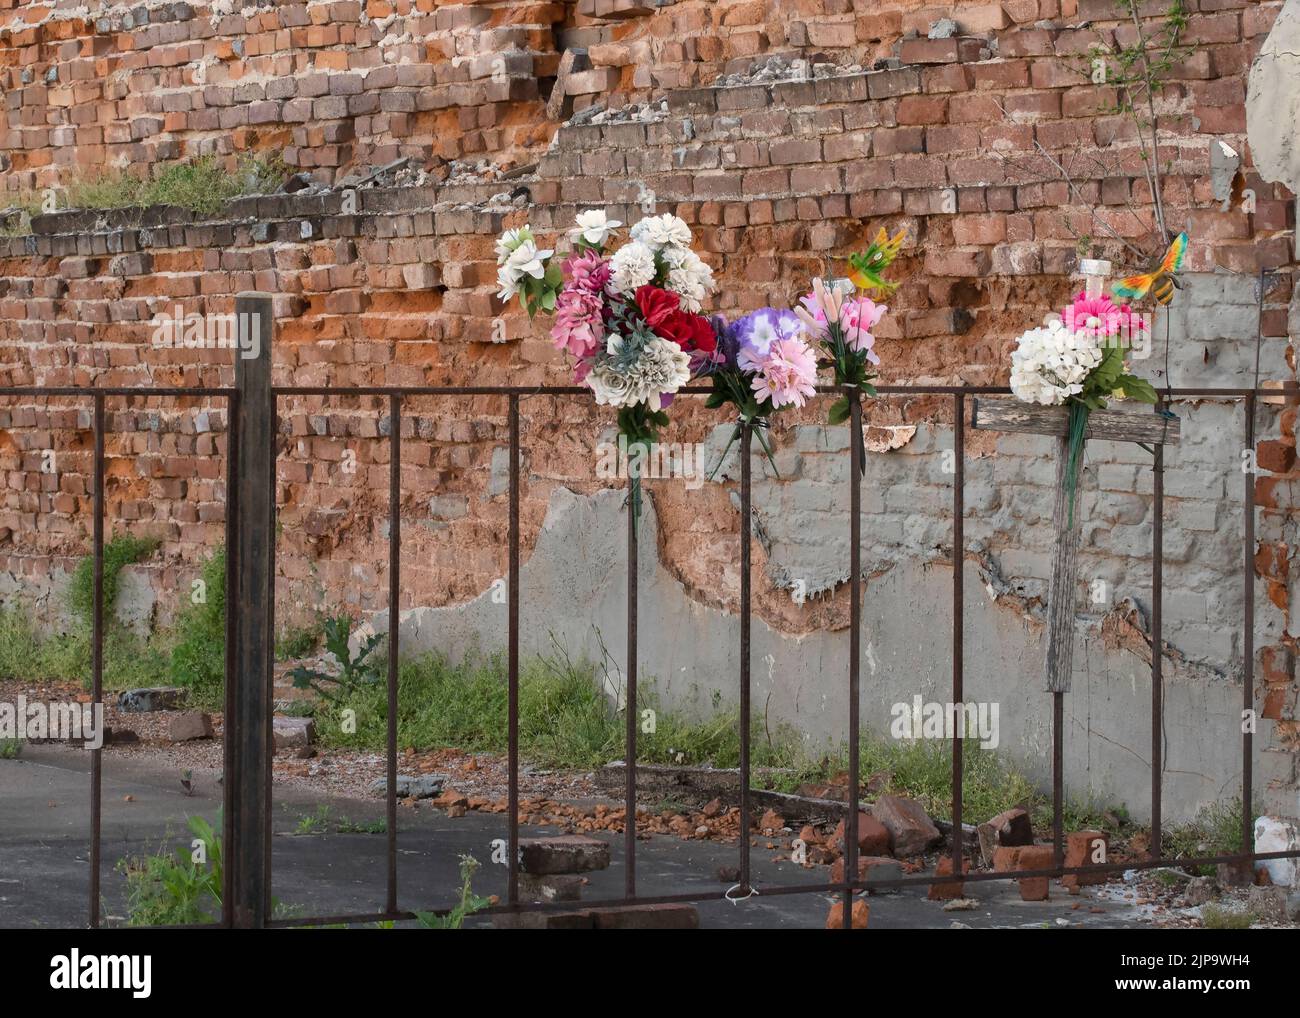 Memorial flowers on a iron fence with a wooden cross.  Old brick wall background. Stock Photo